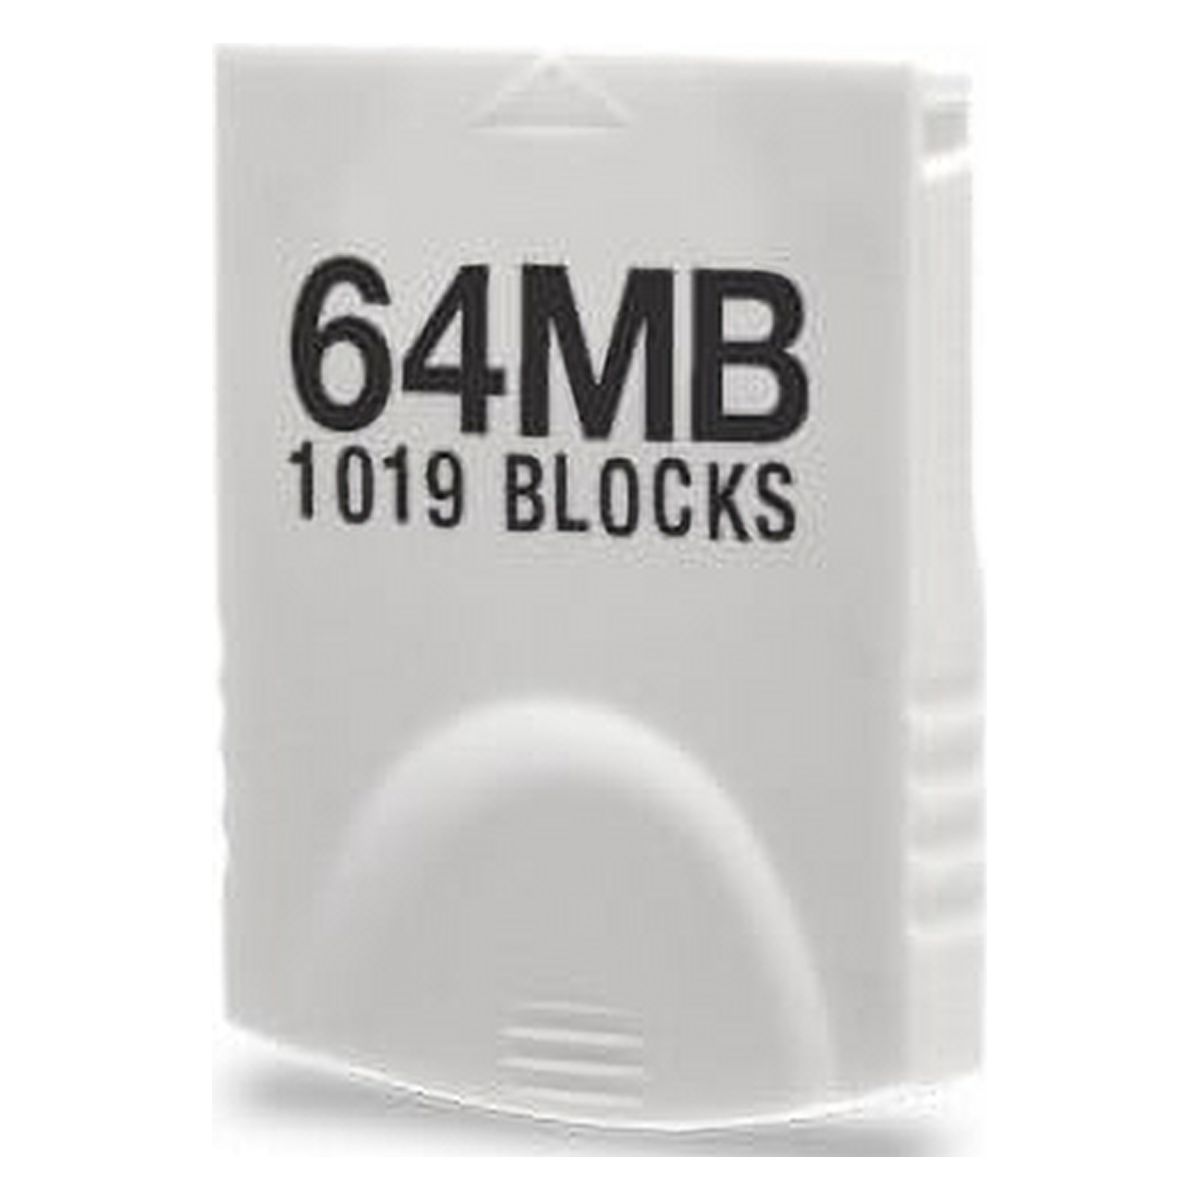 Tomee 64MB Memory Card (1019 Blocks) for Nintendo Wii and GameCube - image 3 of 3